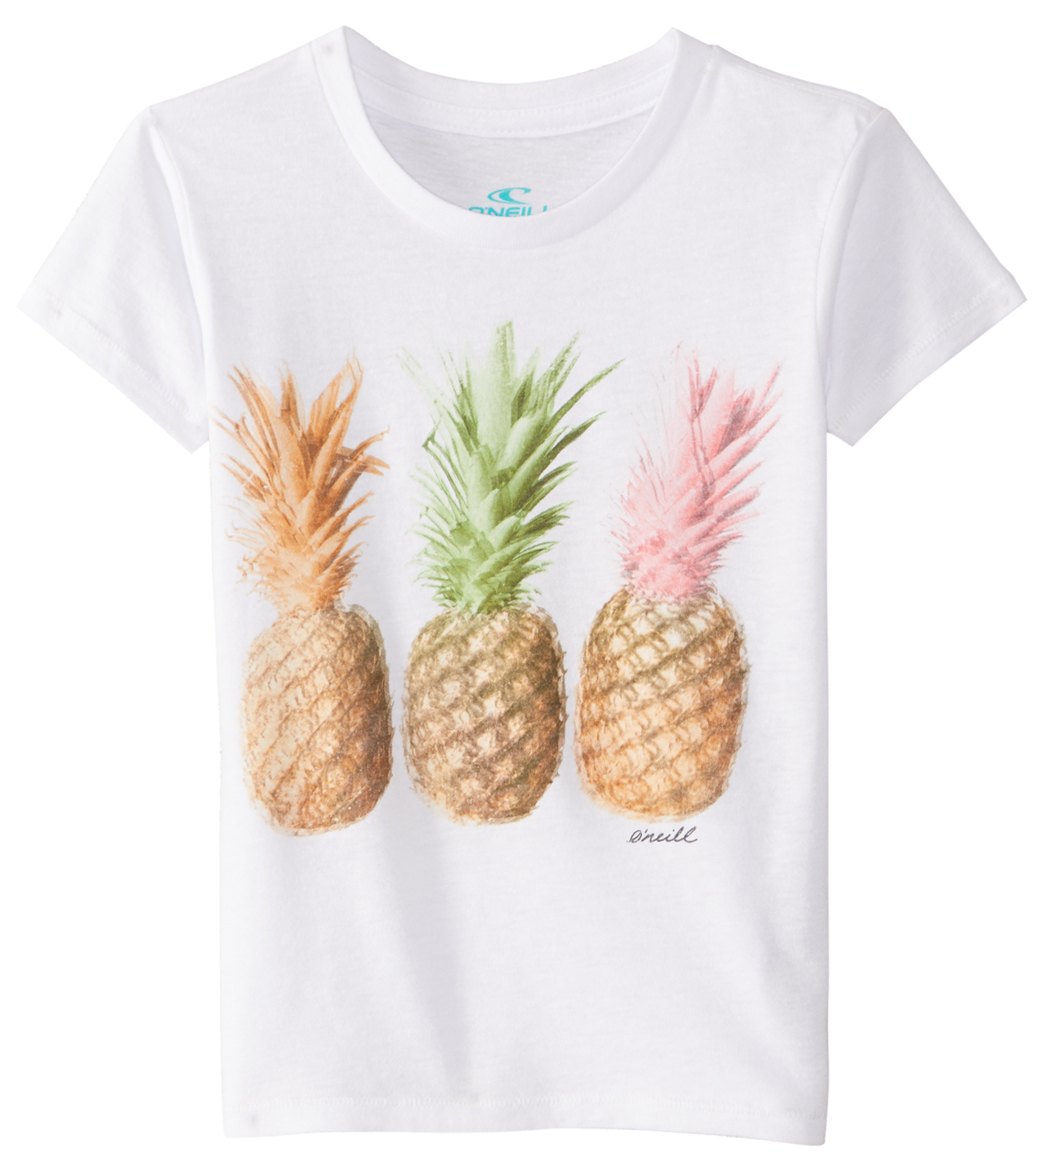 O'neill Girls' Atomic Pineapple Tee Shirt 2T-6 - White 4 Cotton/Polyester - Swimoutlet.com